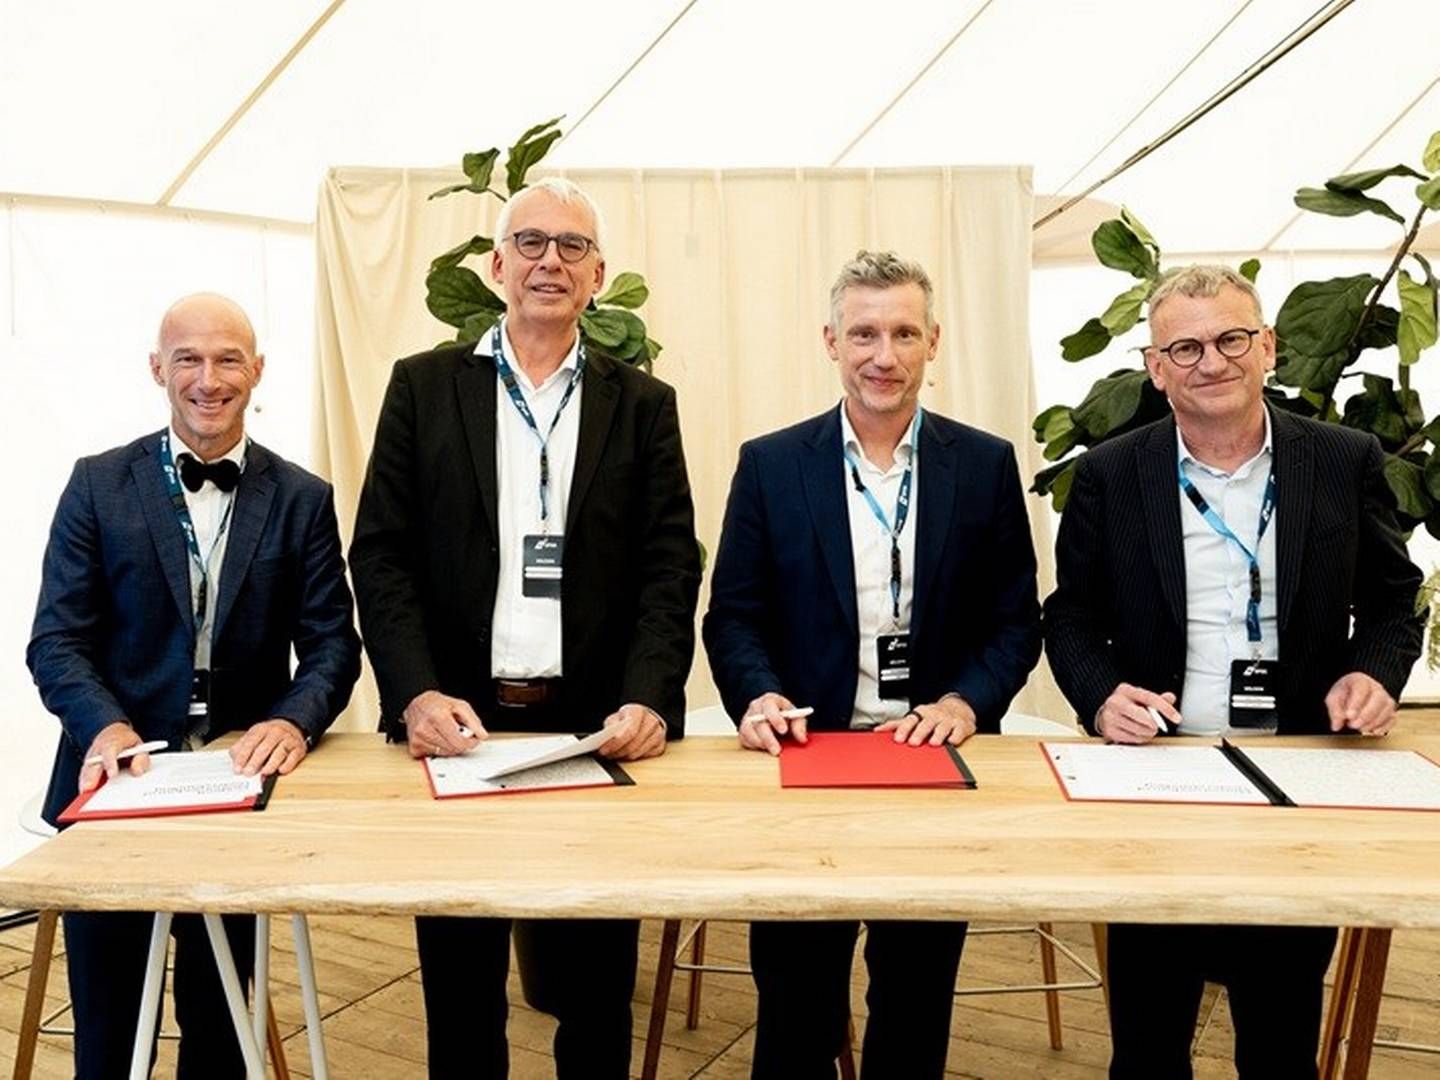 (L-R): Port of Gothenburg's Head of Strategic Development and Innovation, Patrik Benrick, Luc Arnouts, VP International Networks, Port of Antwerp-Bruges, Jacob Andersen, Vice President North Sea at DFDS and CEO of North Sea Port, Daan Schalck. | Foto: Pressebillede, DFDS